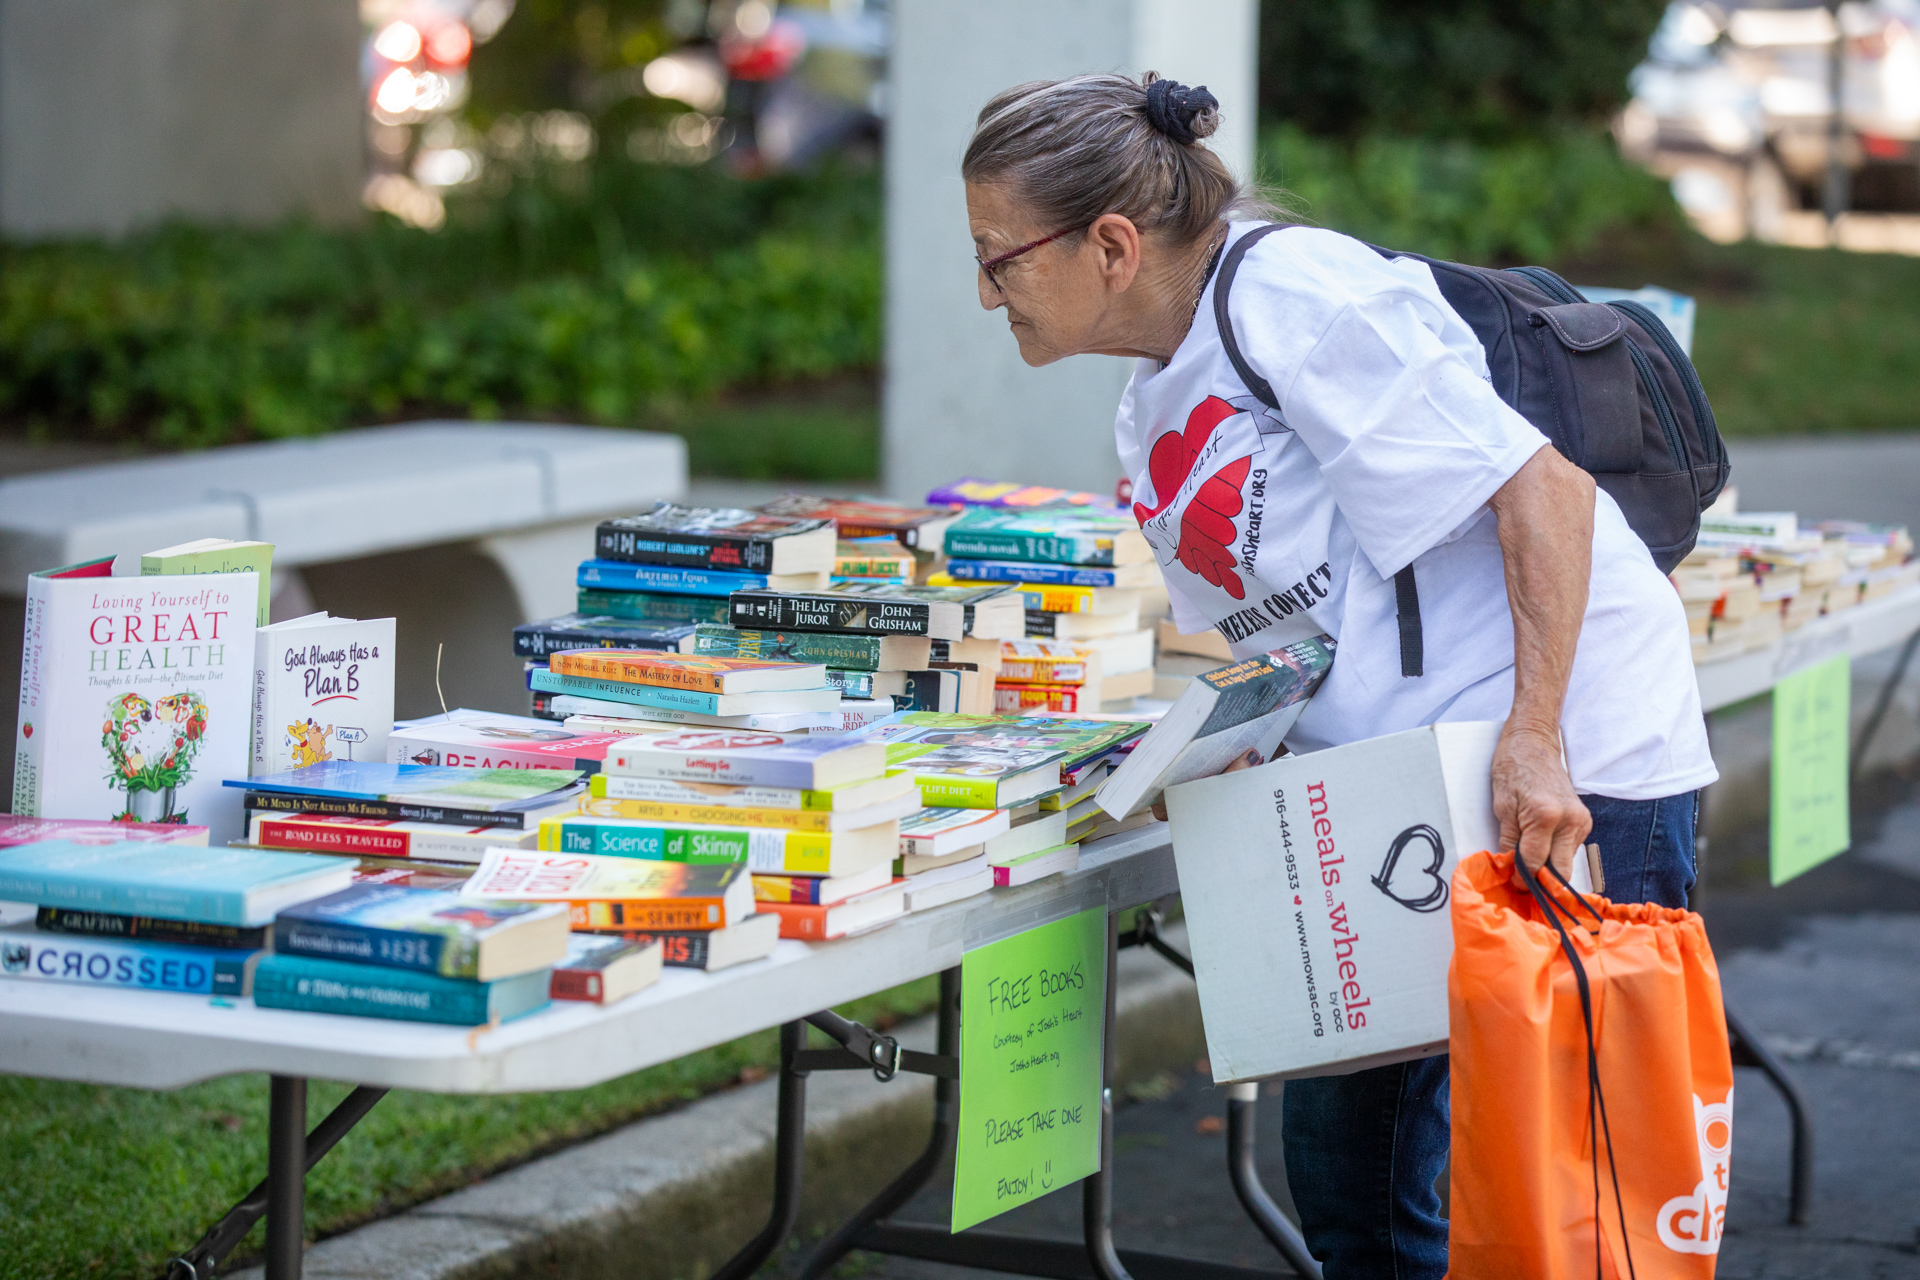 A woman looks at a table full of books.